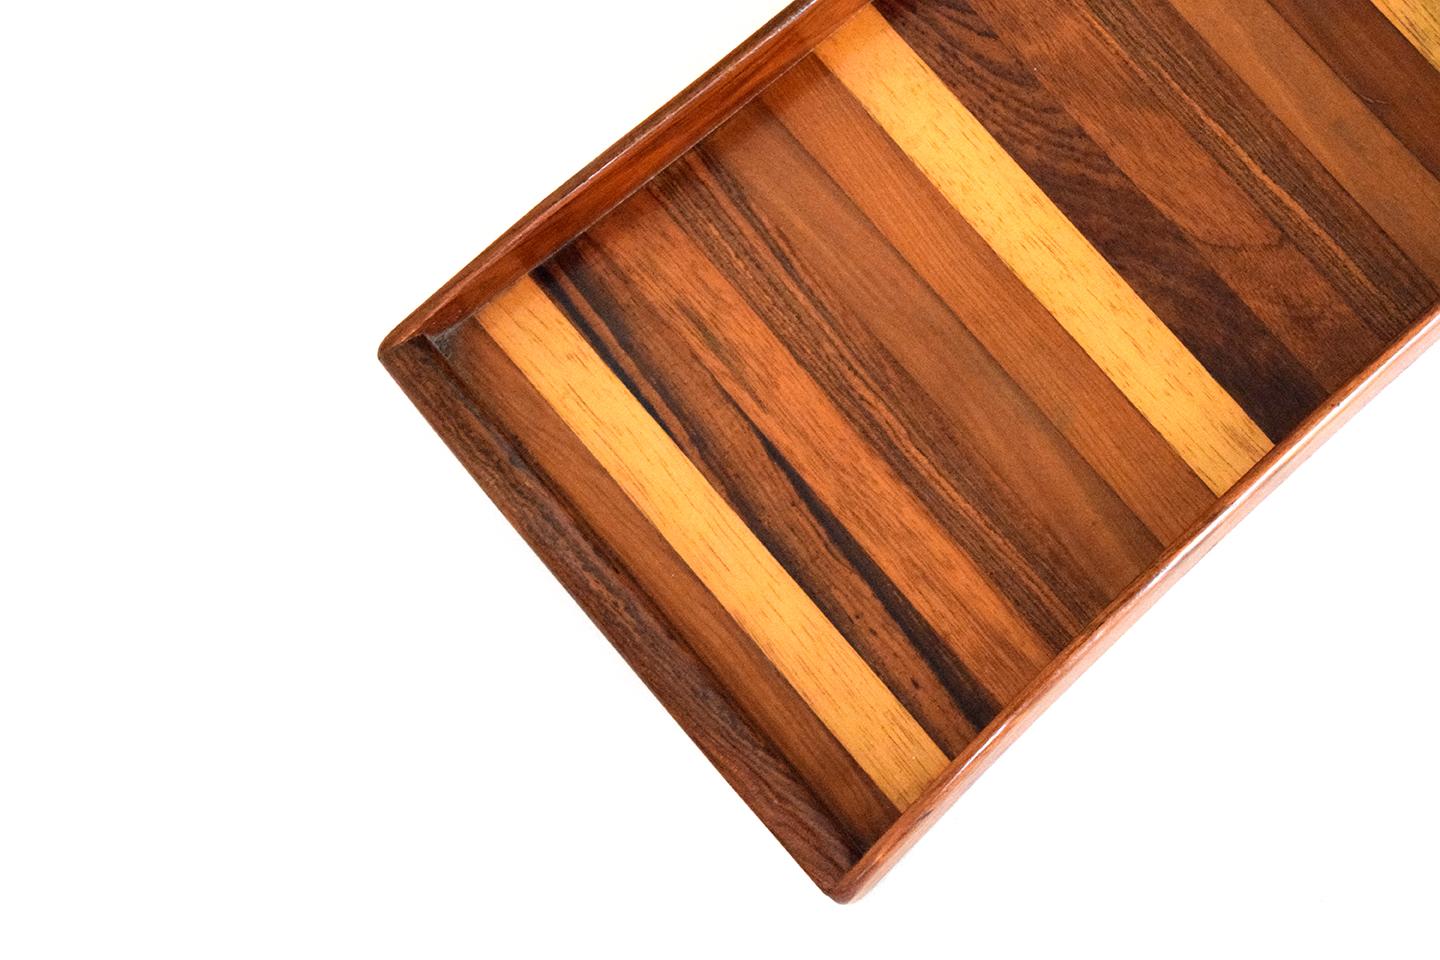 Hand-Crafted Don Shoemaker Serving Tray Made with Different Woods